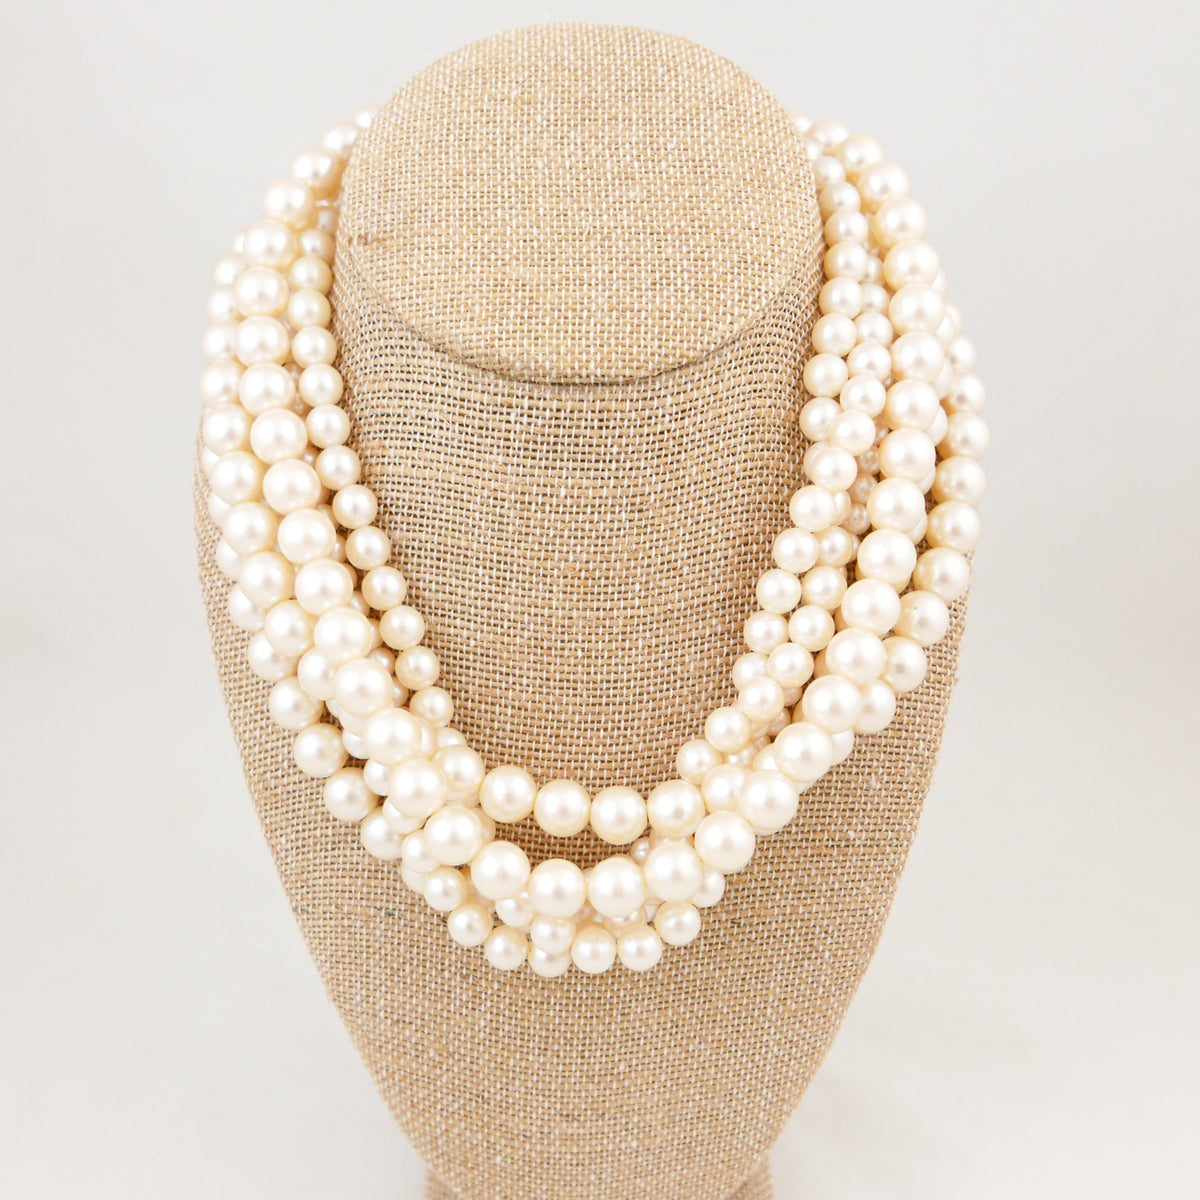 1980s Givenchy Gold Logo Clasp Triple-Strand Faux Pearl Necklace | eBay